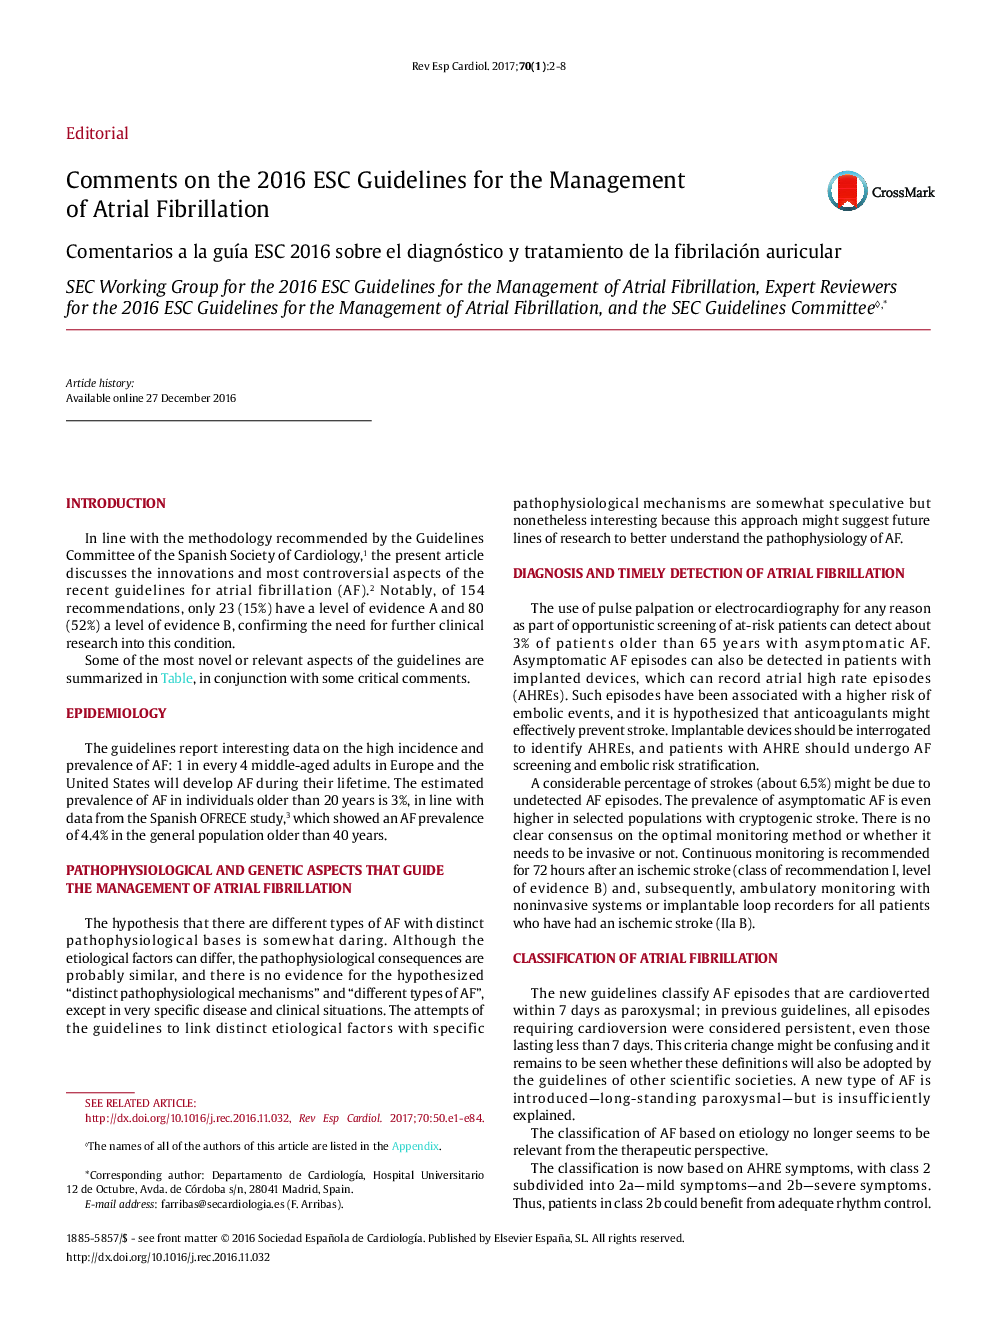 Comments on the 2016 ESC Guidelines for the Management of Atrial Fibrillation